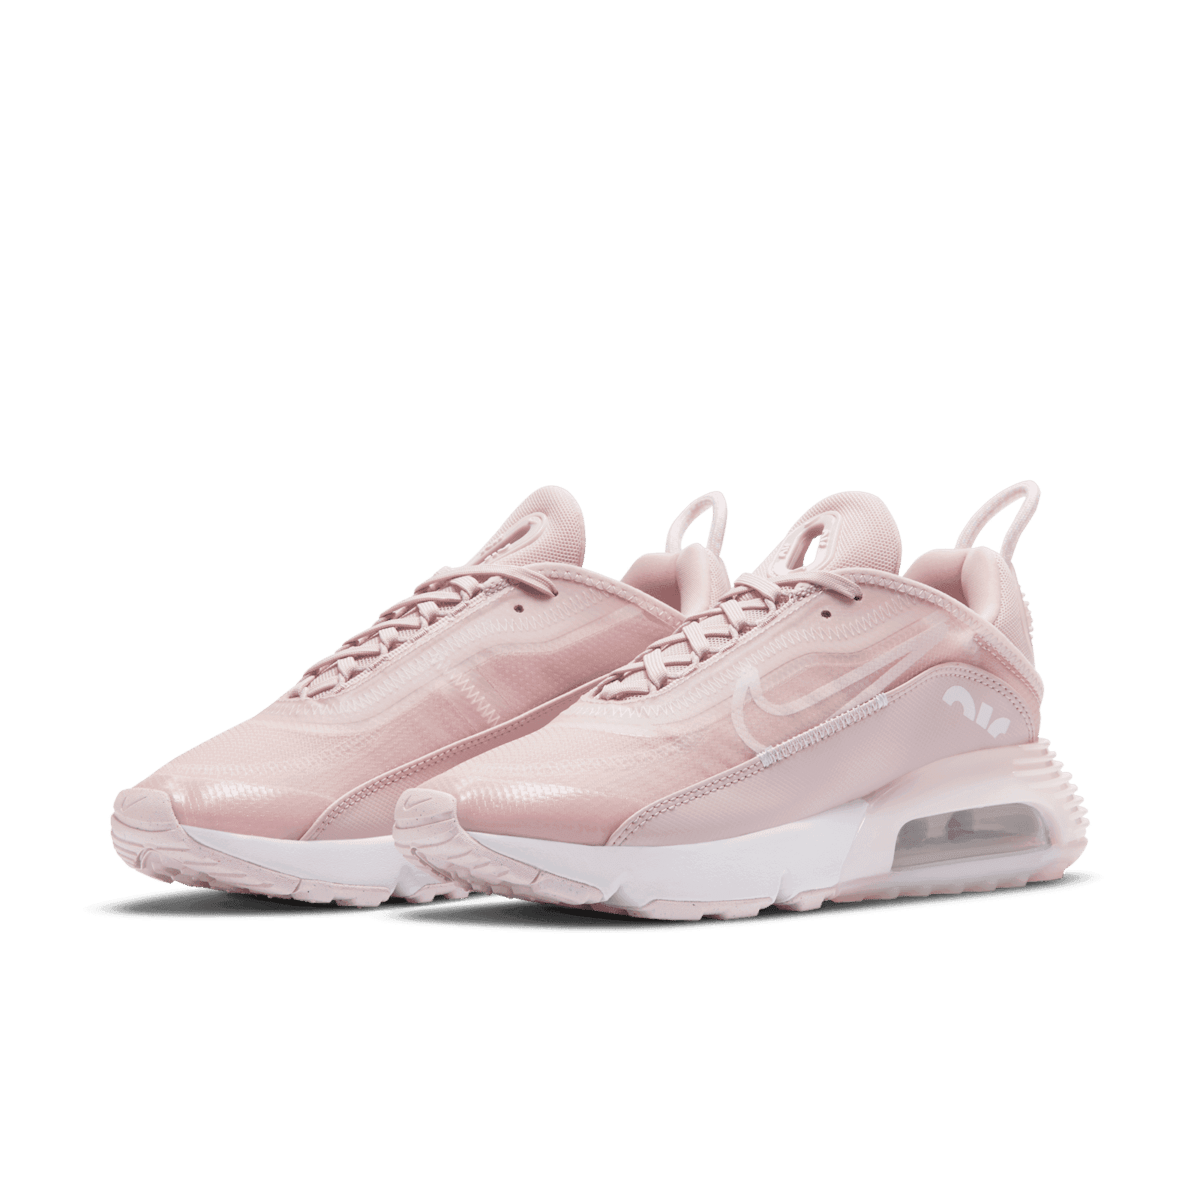 Nike Air Max 2090 Shoes in Pink Angle 2